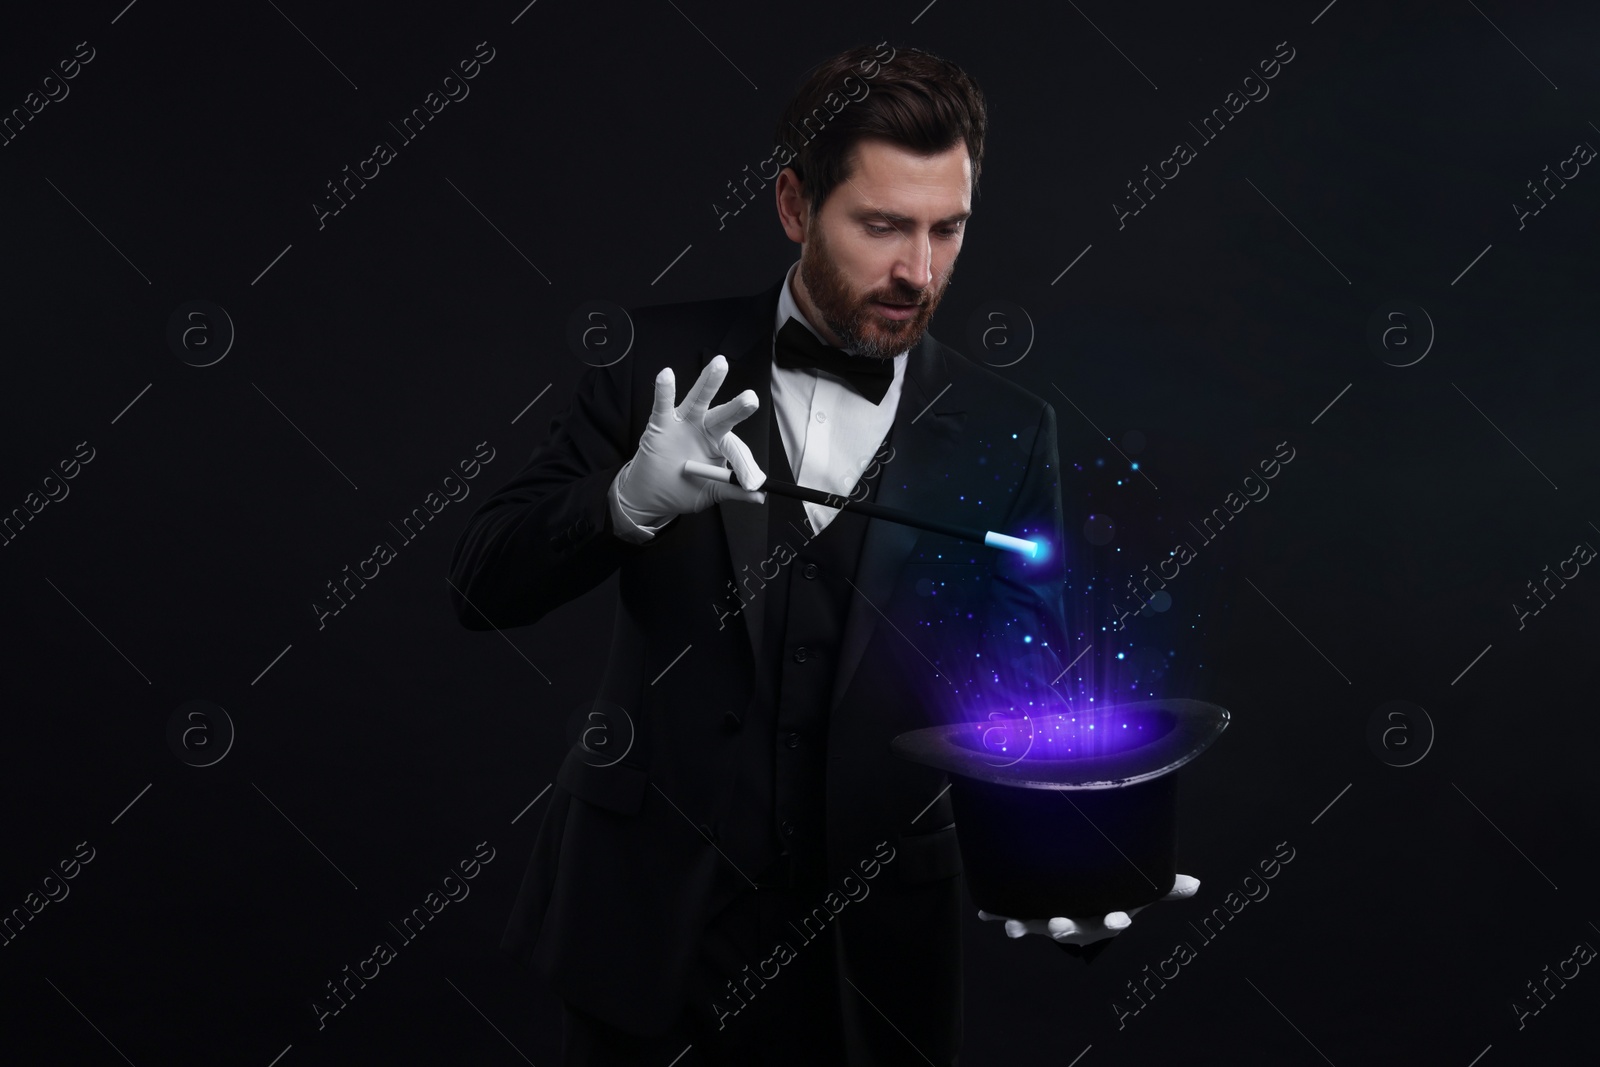 Image of Magician showing trick with top hat and wand on black background